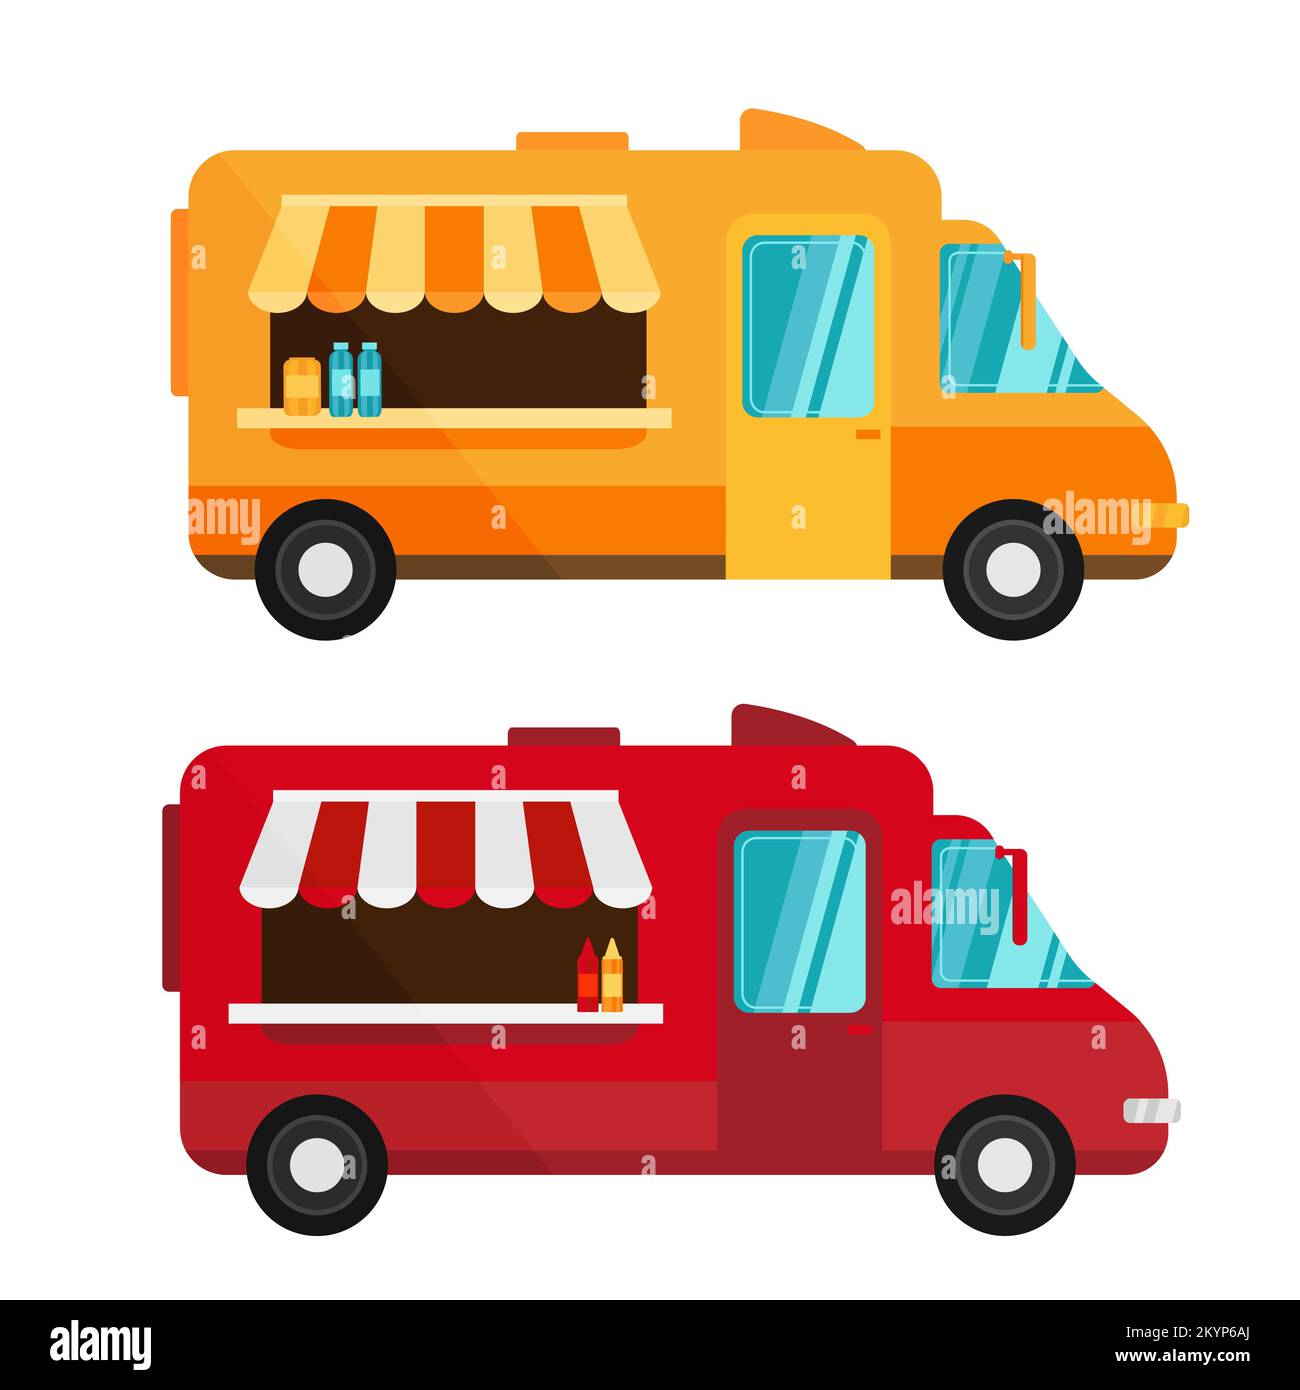 Food truck template. Two colors options. Street fast food truck, takeaway restaurant, market in street vector illustration in flat cartoon style. Stock Vector